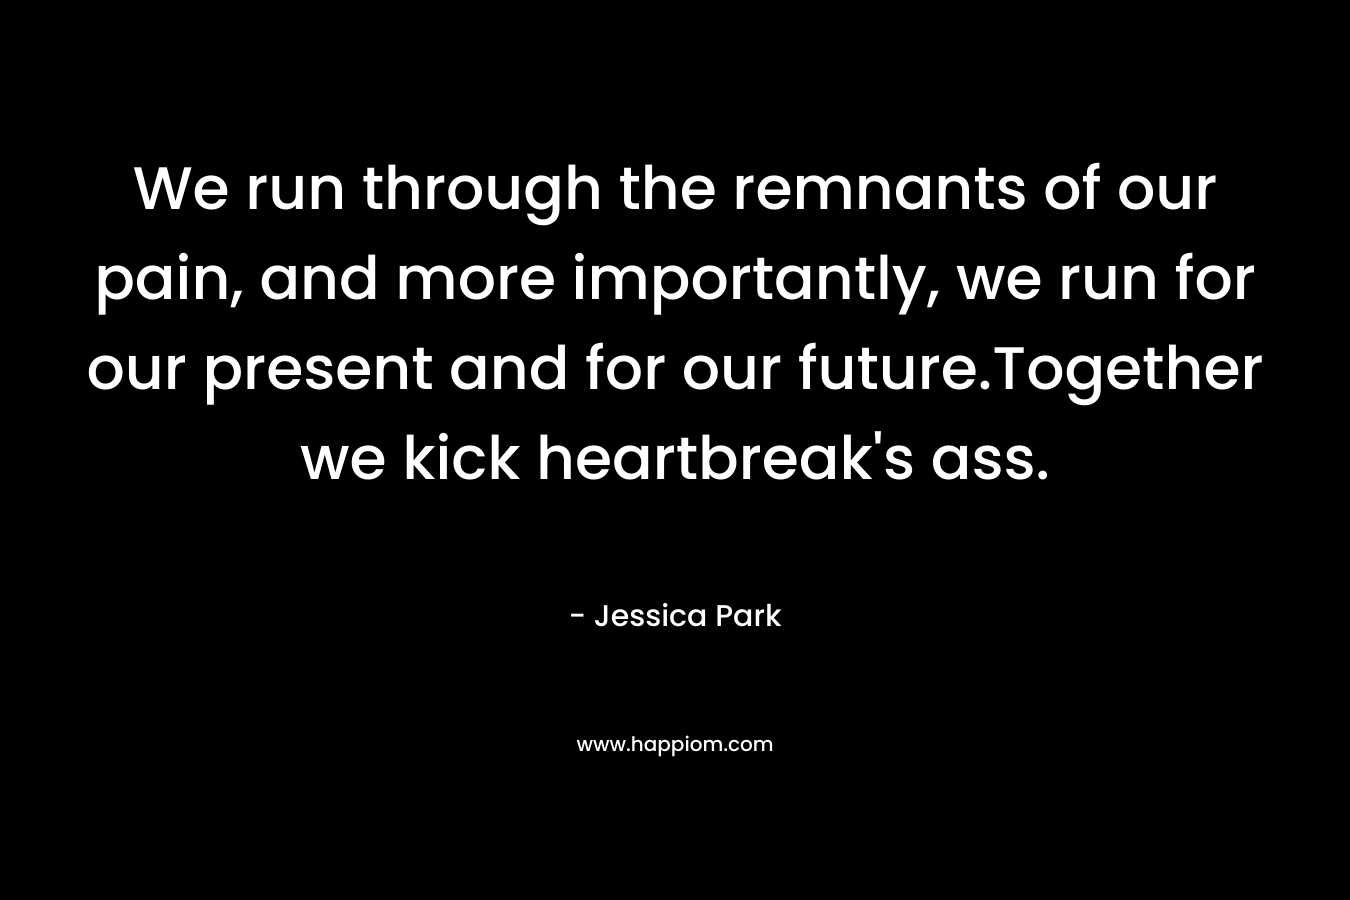 We run through the remnants of our pain, and more importantly, we run for our present and for our future.Together we kick heartbreak’s ass. – Jessica Park